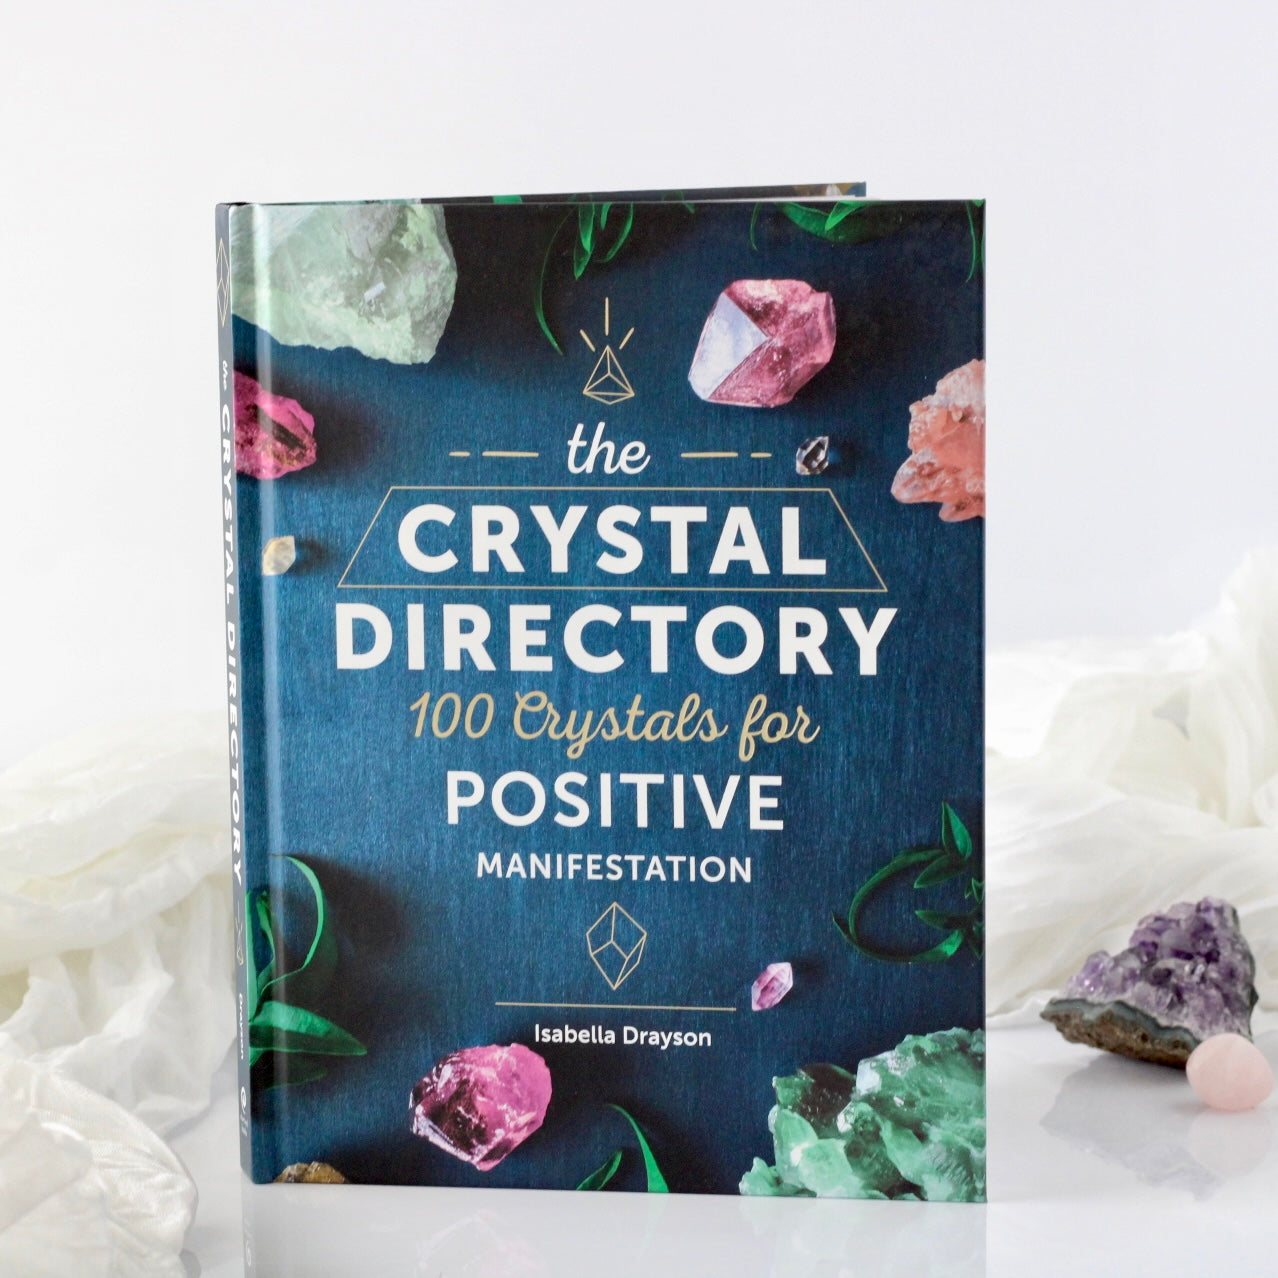 Crystal Directory: 100 Crystals For Positive Manifestation by Isabella Drayson